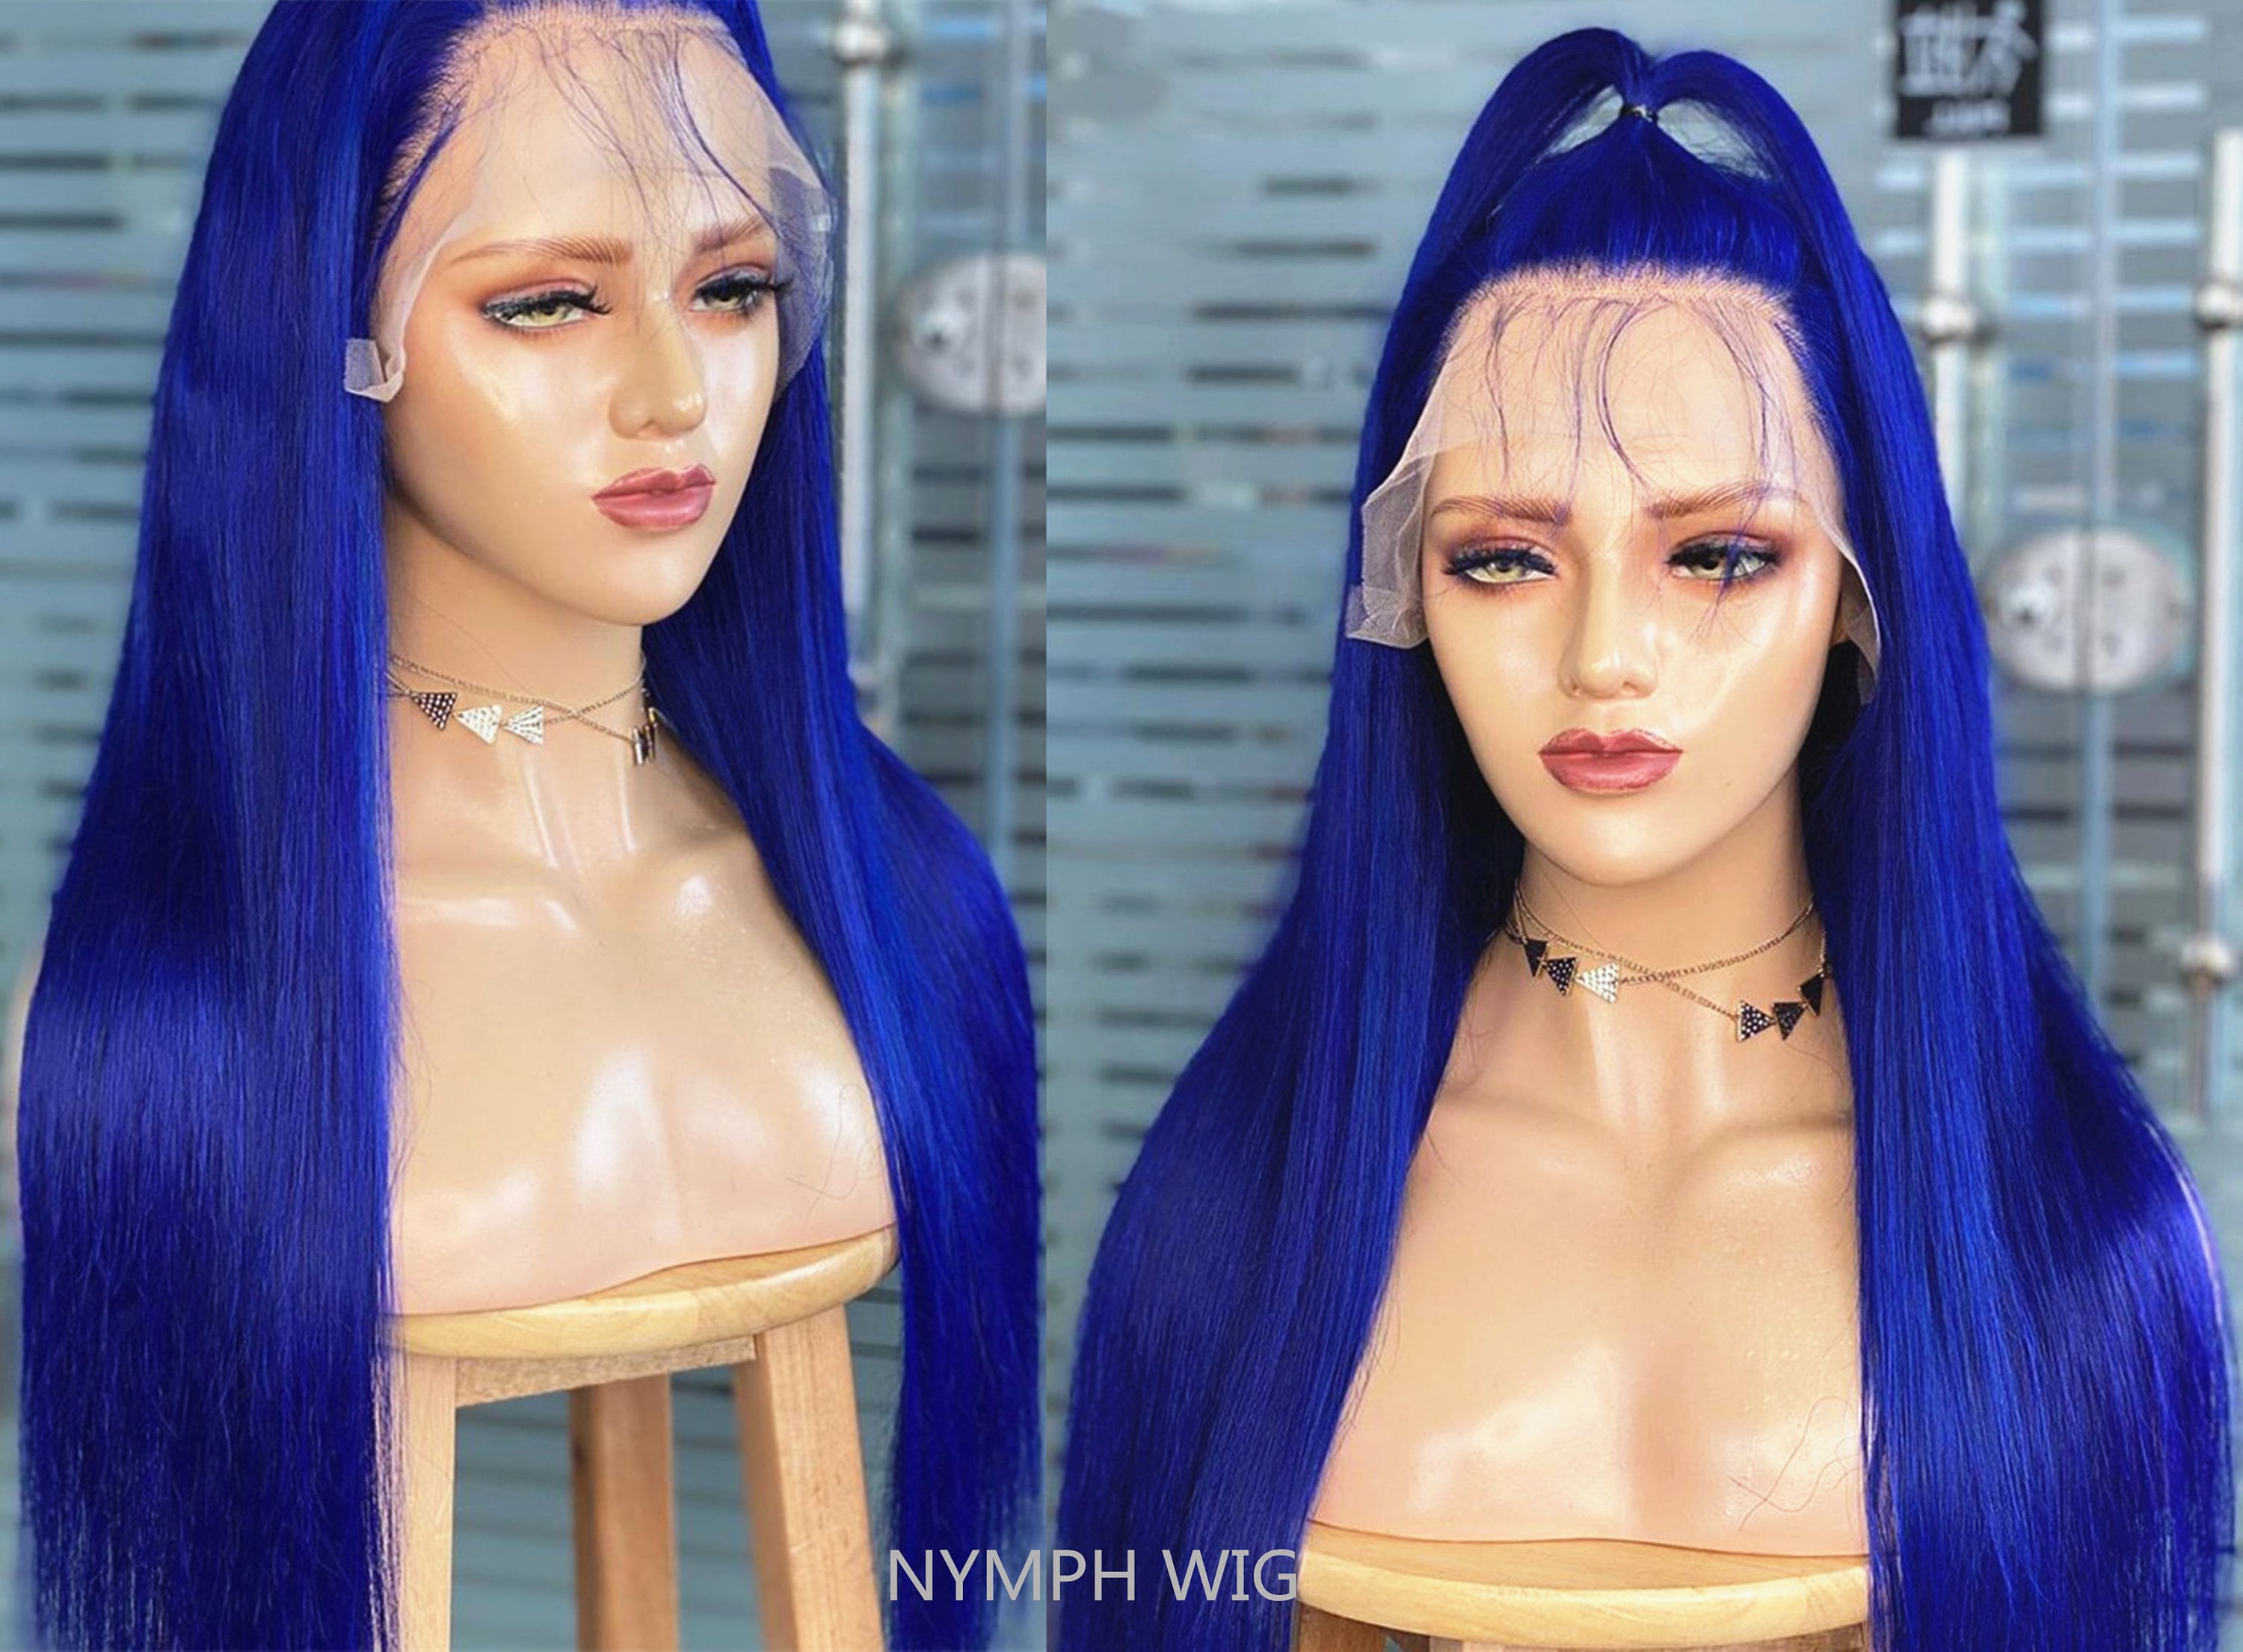 1. "Good Quality Blue Hair Wigs" - wide 9